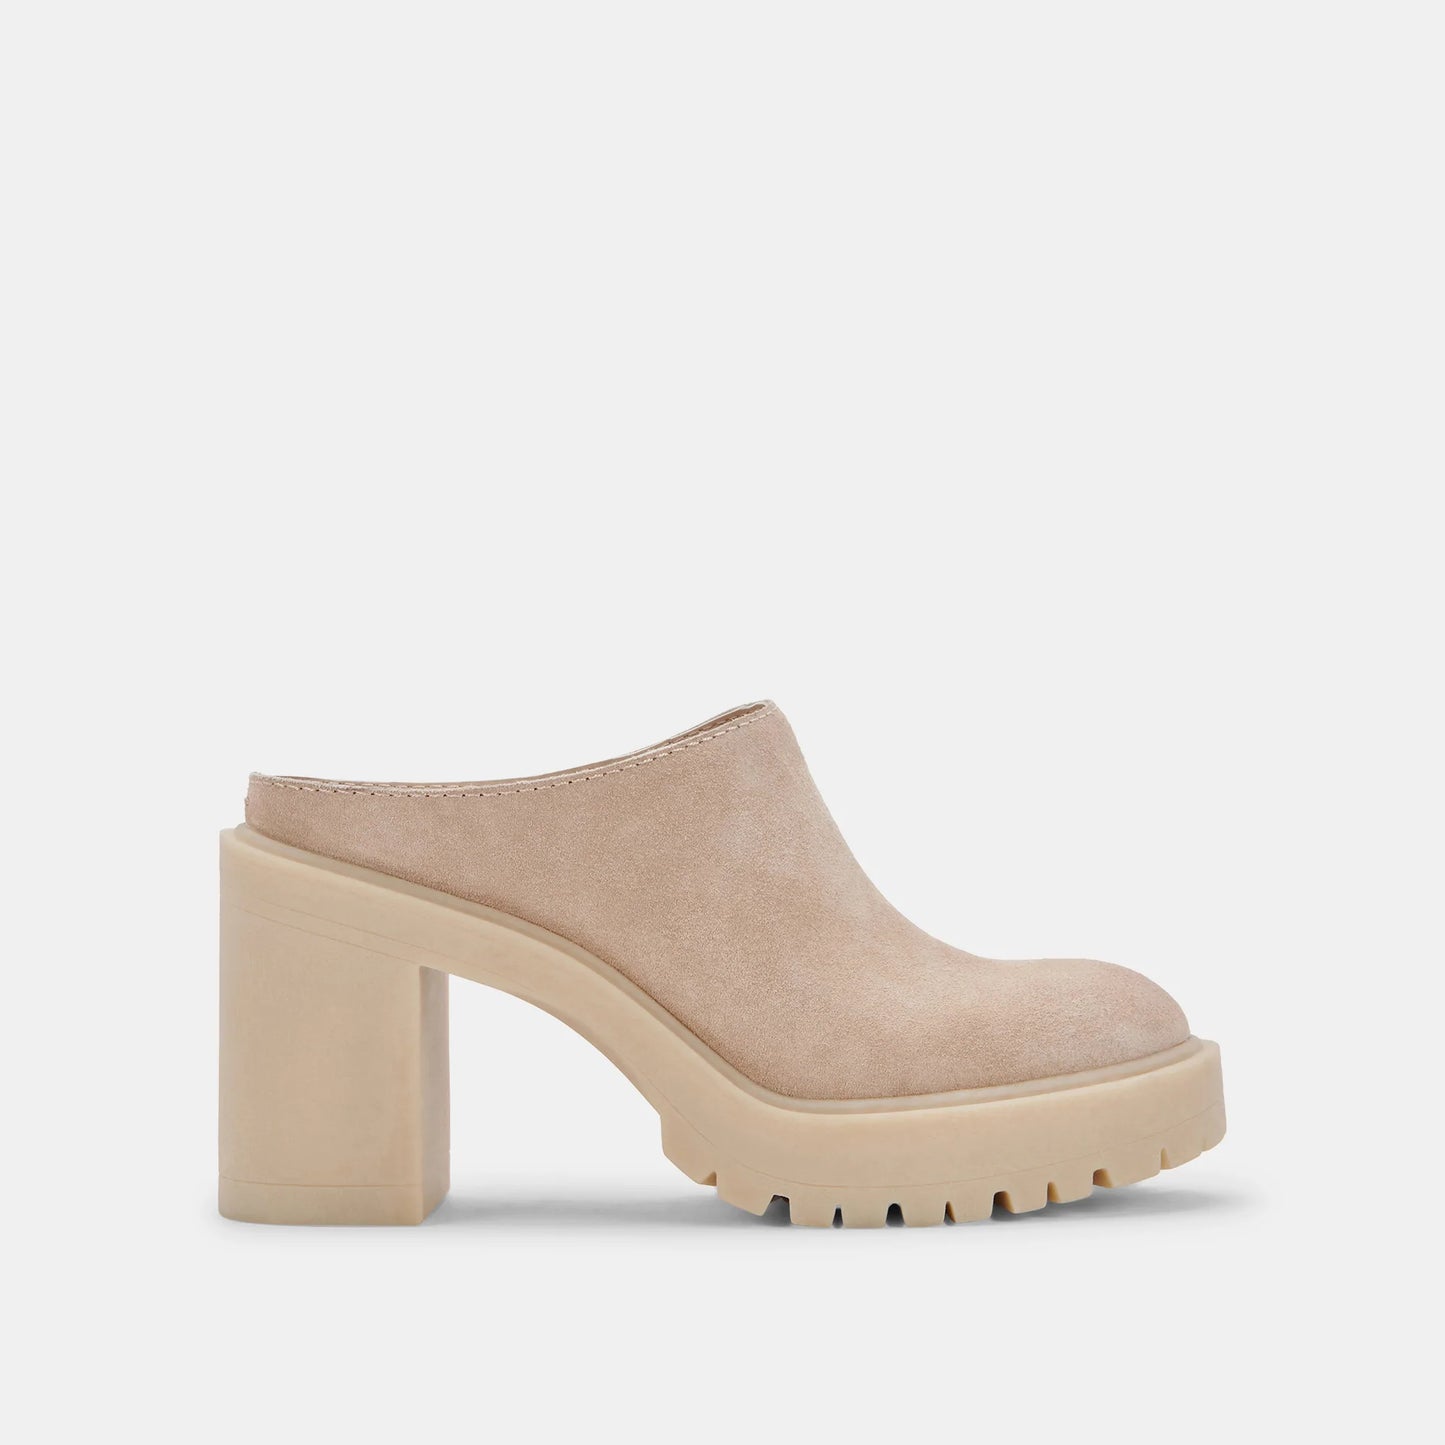 Load image into Gallery viewer, Dolce Vita Carry Heels - Dune Suede
